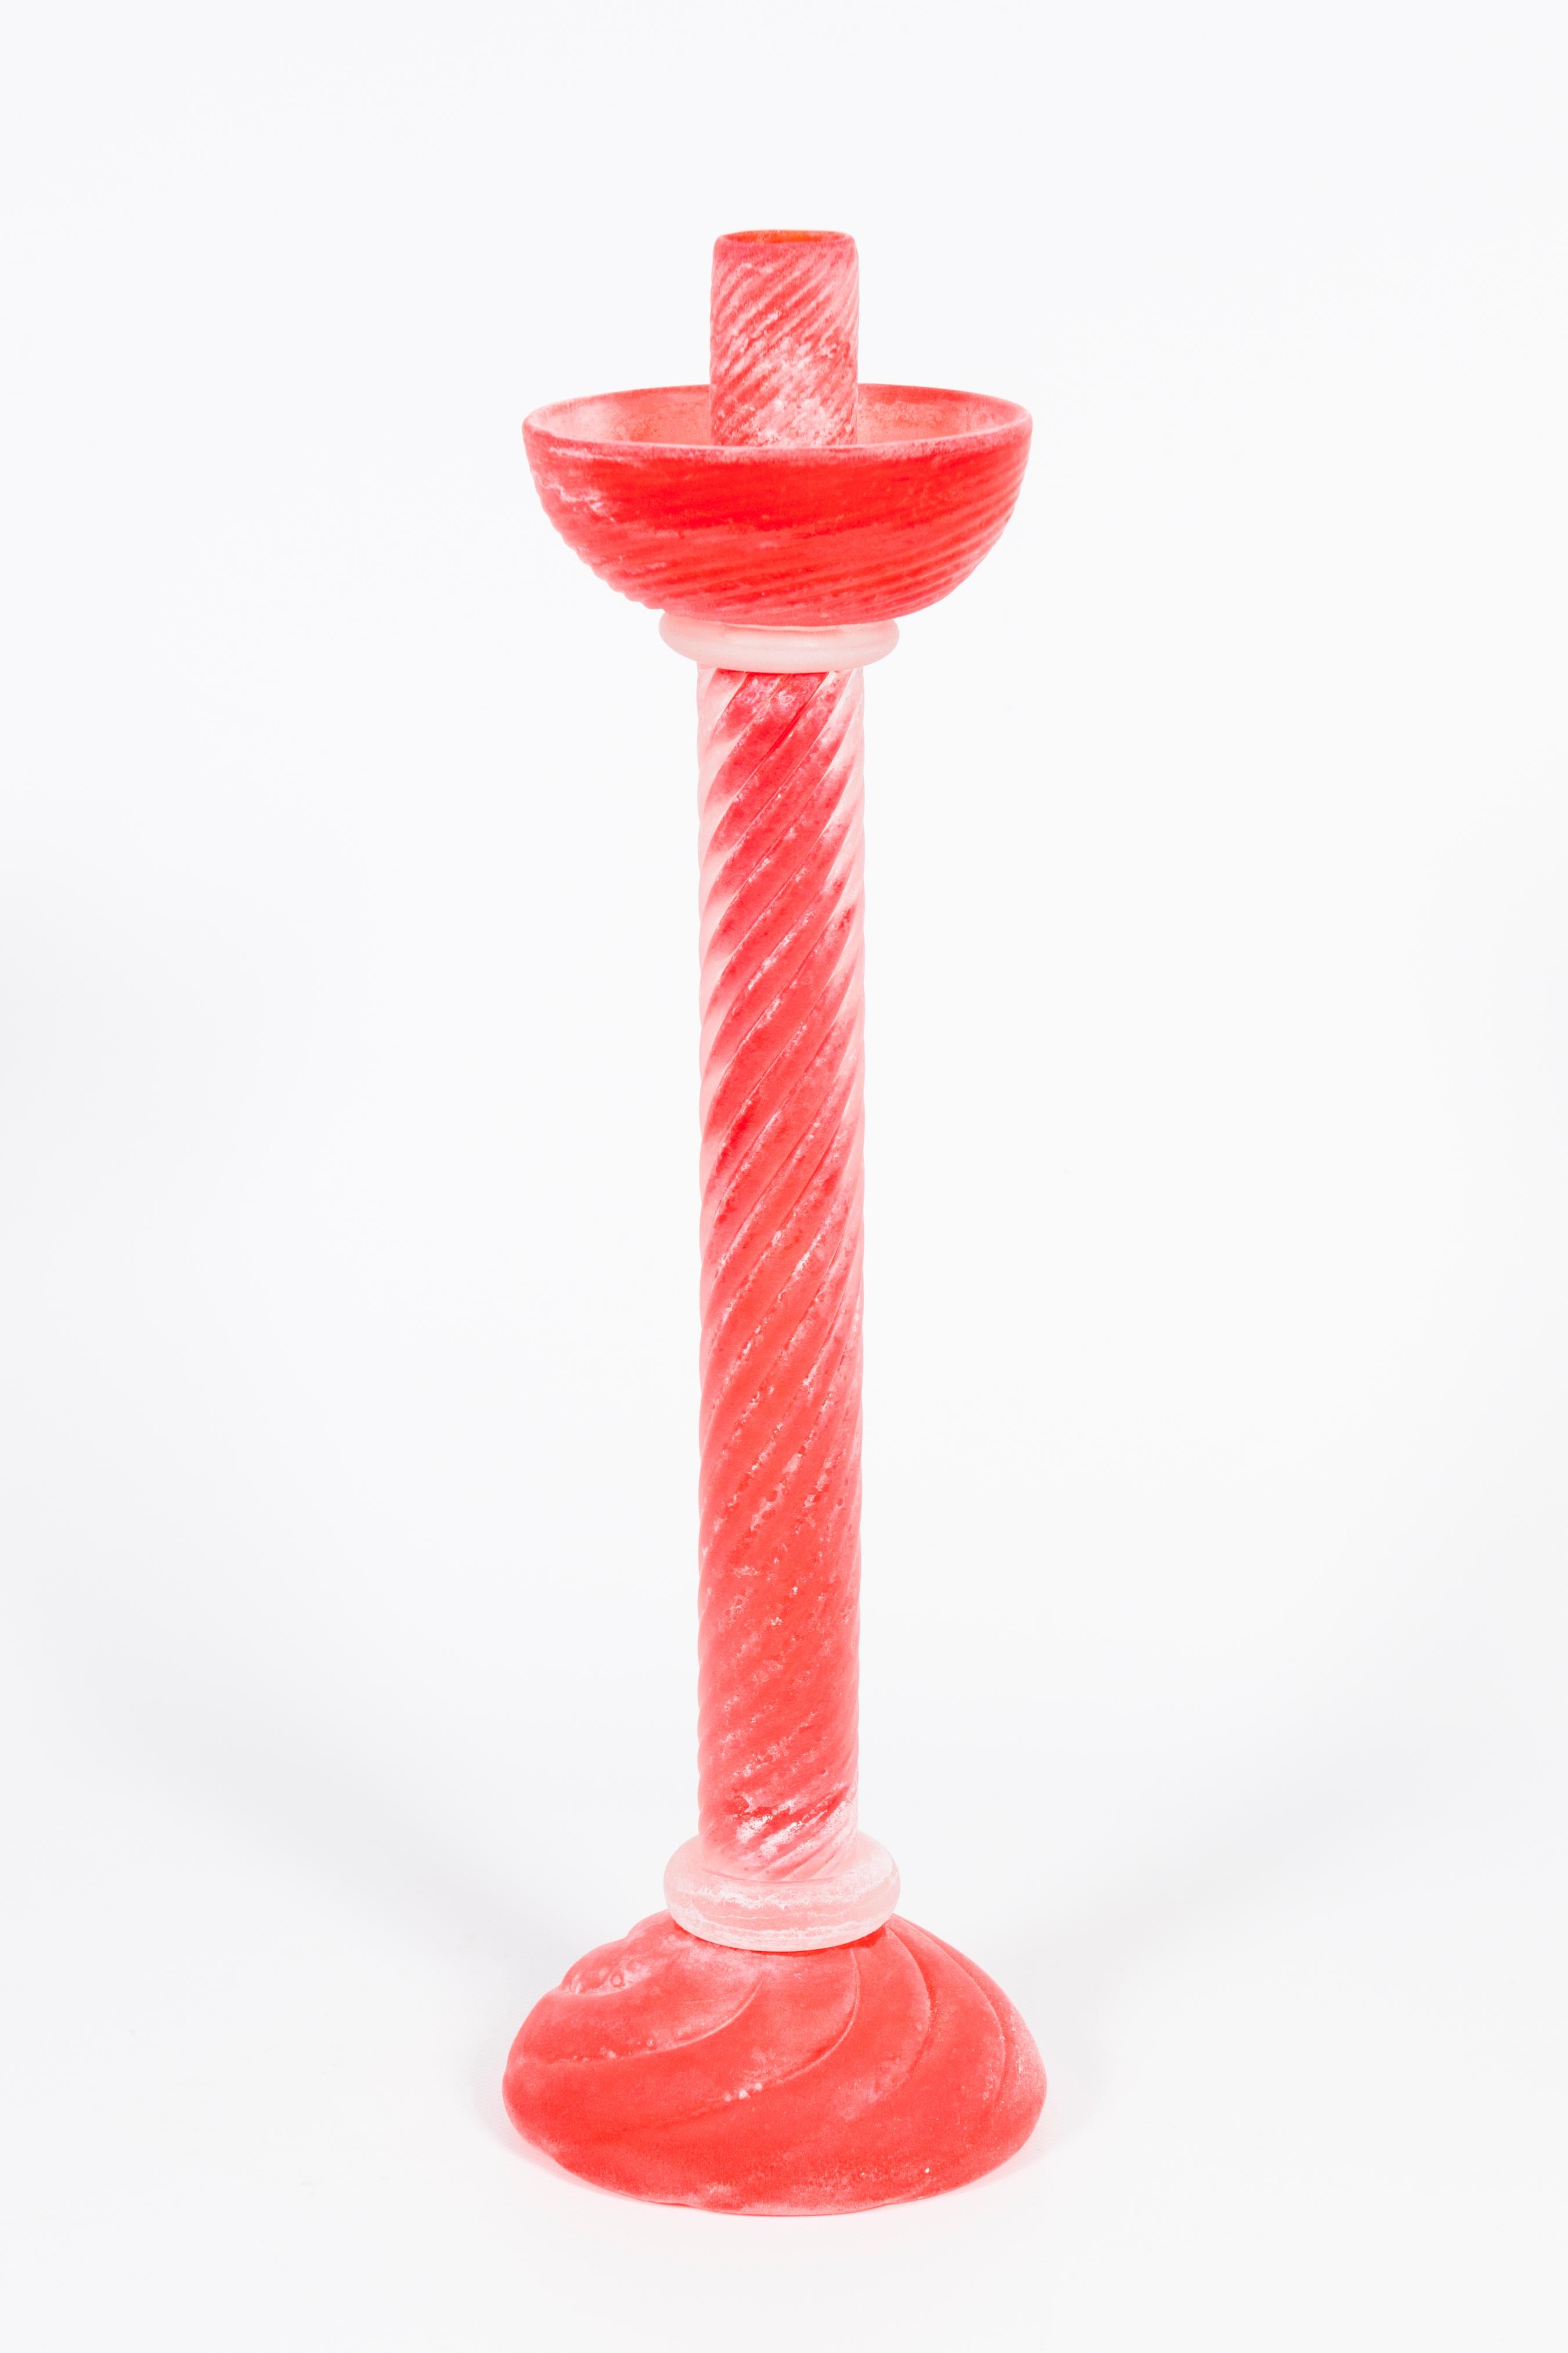 Italian Venetian Murano Glass Scavo Candlestick 1980s Signed Cenedese.
This amazing candle holder was made by Cenedese, one of the most appreciated glass artists from the Venetian island of Murano. It bears its distinguished signature at the